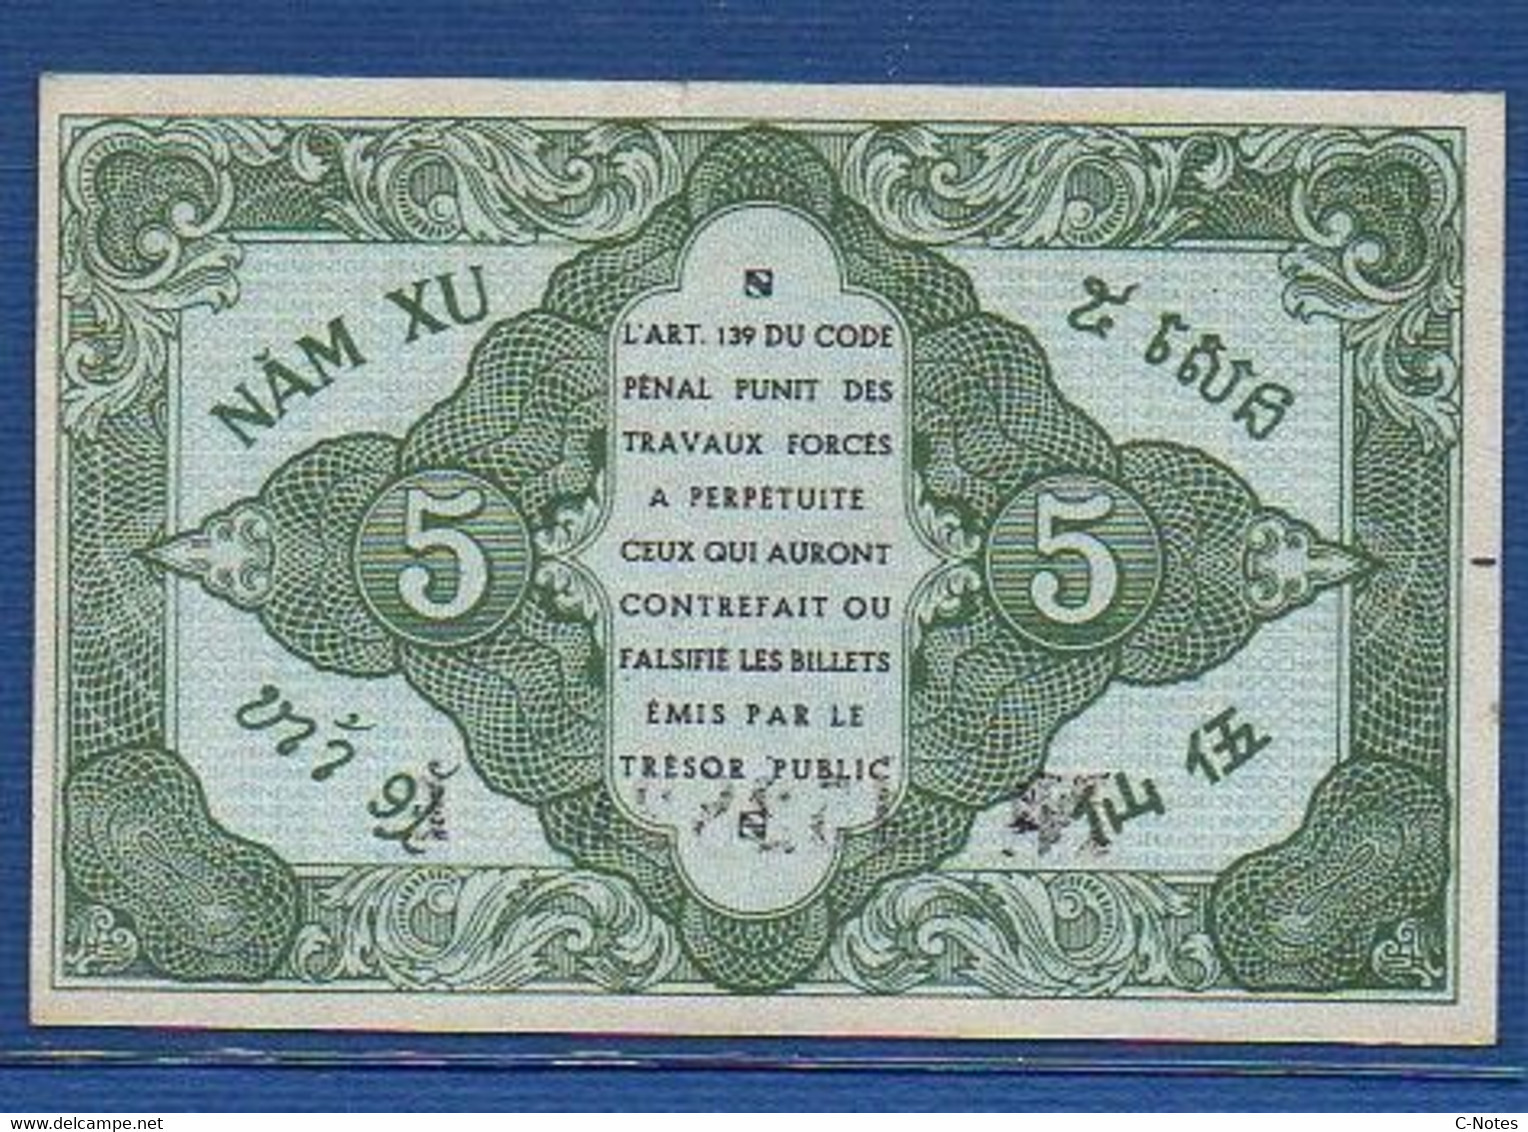 FRENCH INDOCHINA - P. 88a –  5 Cents ND (1942) AUNC-, S/n 452825 E - Indocina